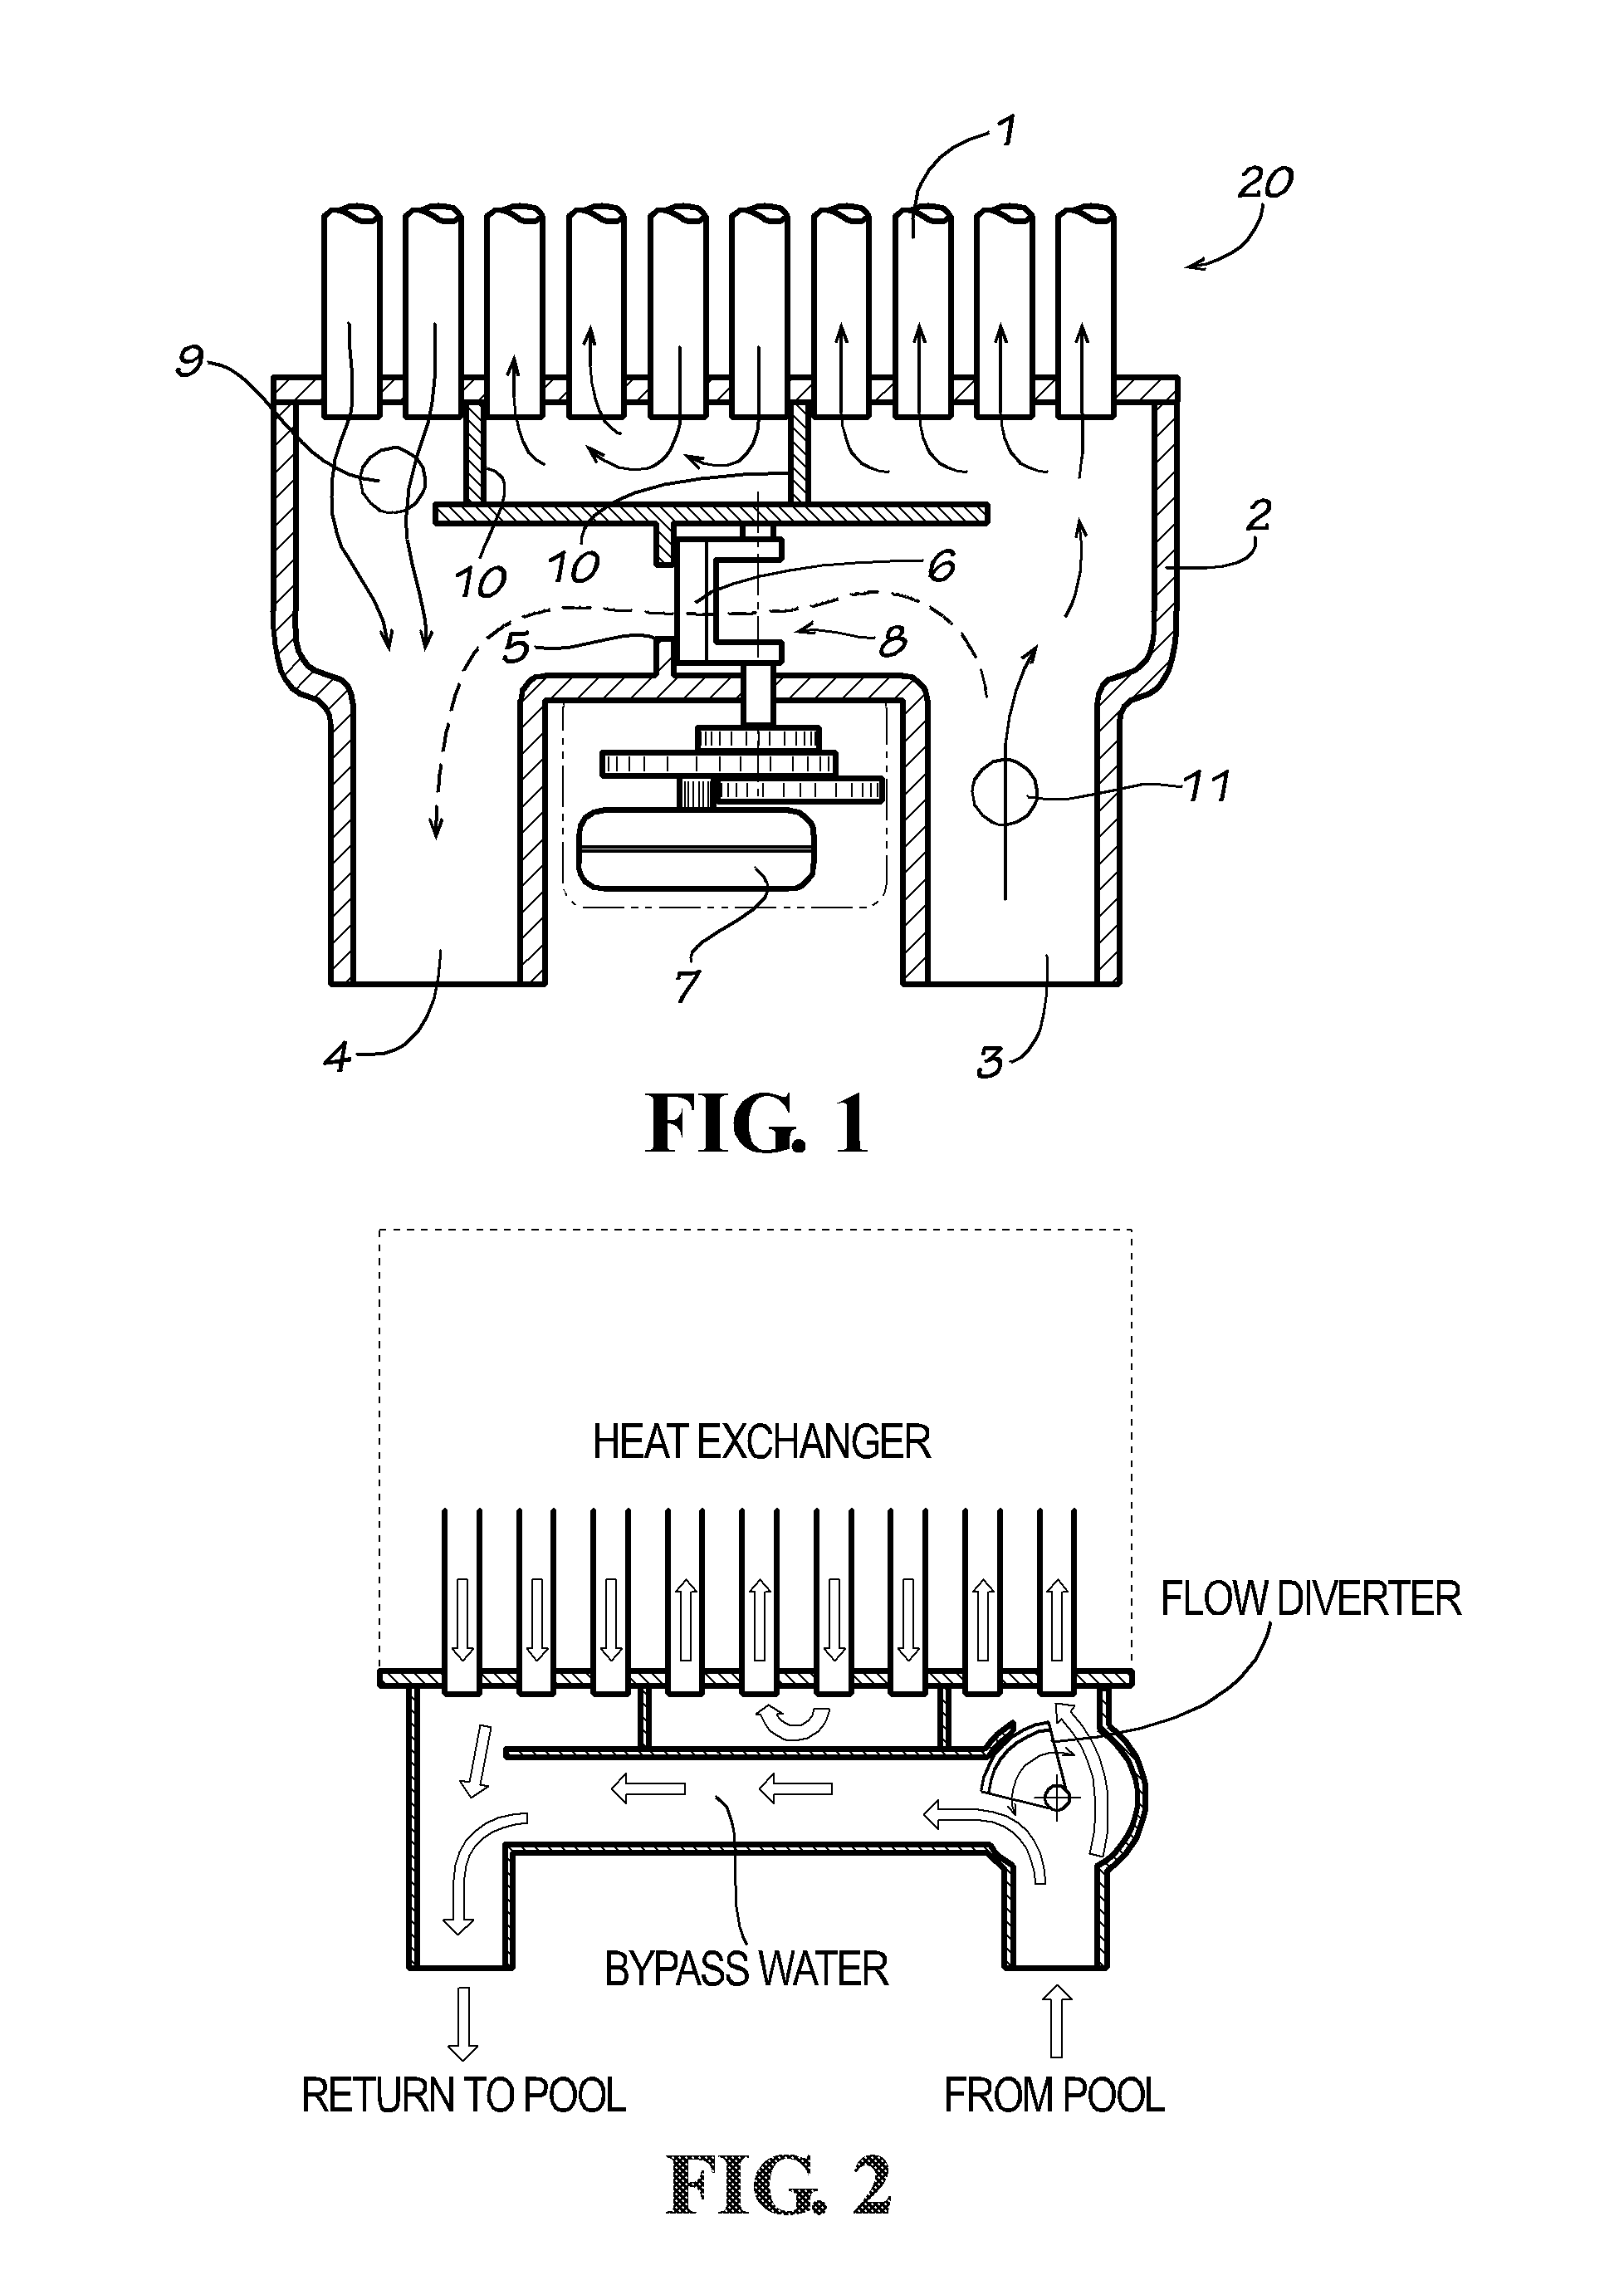 Flow control and improved heat rise control device for water heaters